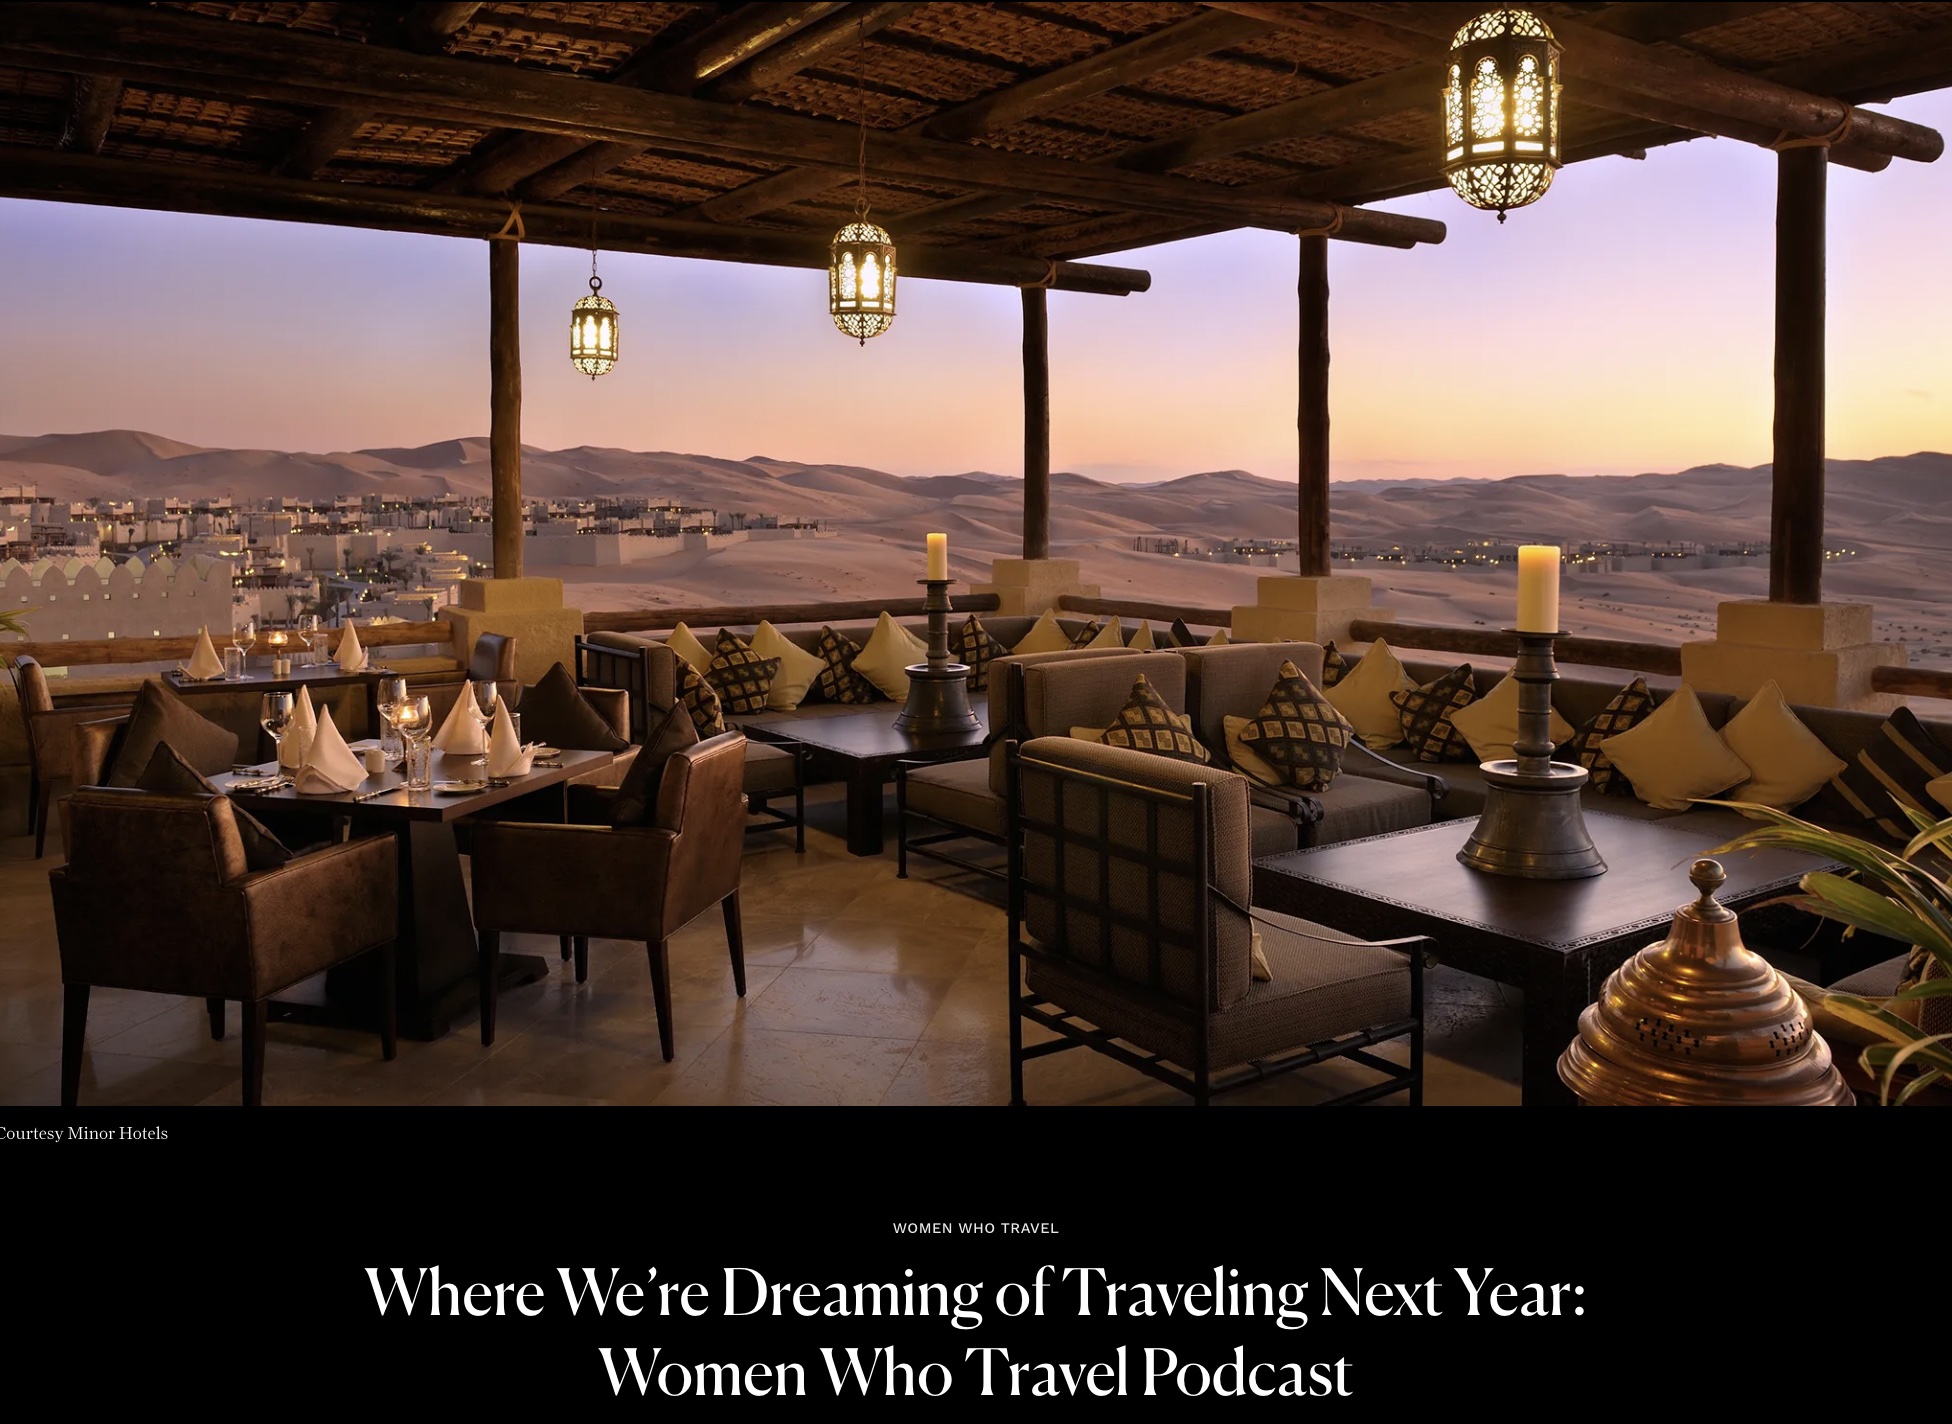 Condé Nast Traveler podcast: Where We’re Dreaming of Traveling Next Year